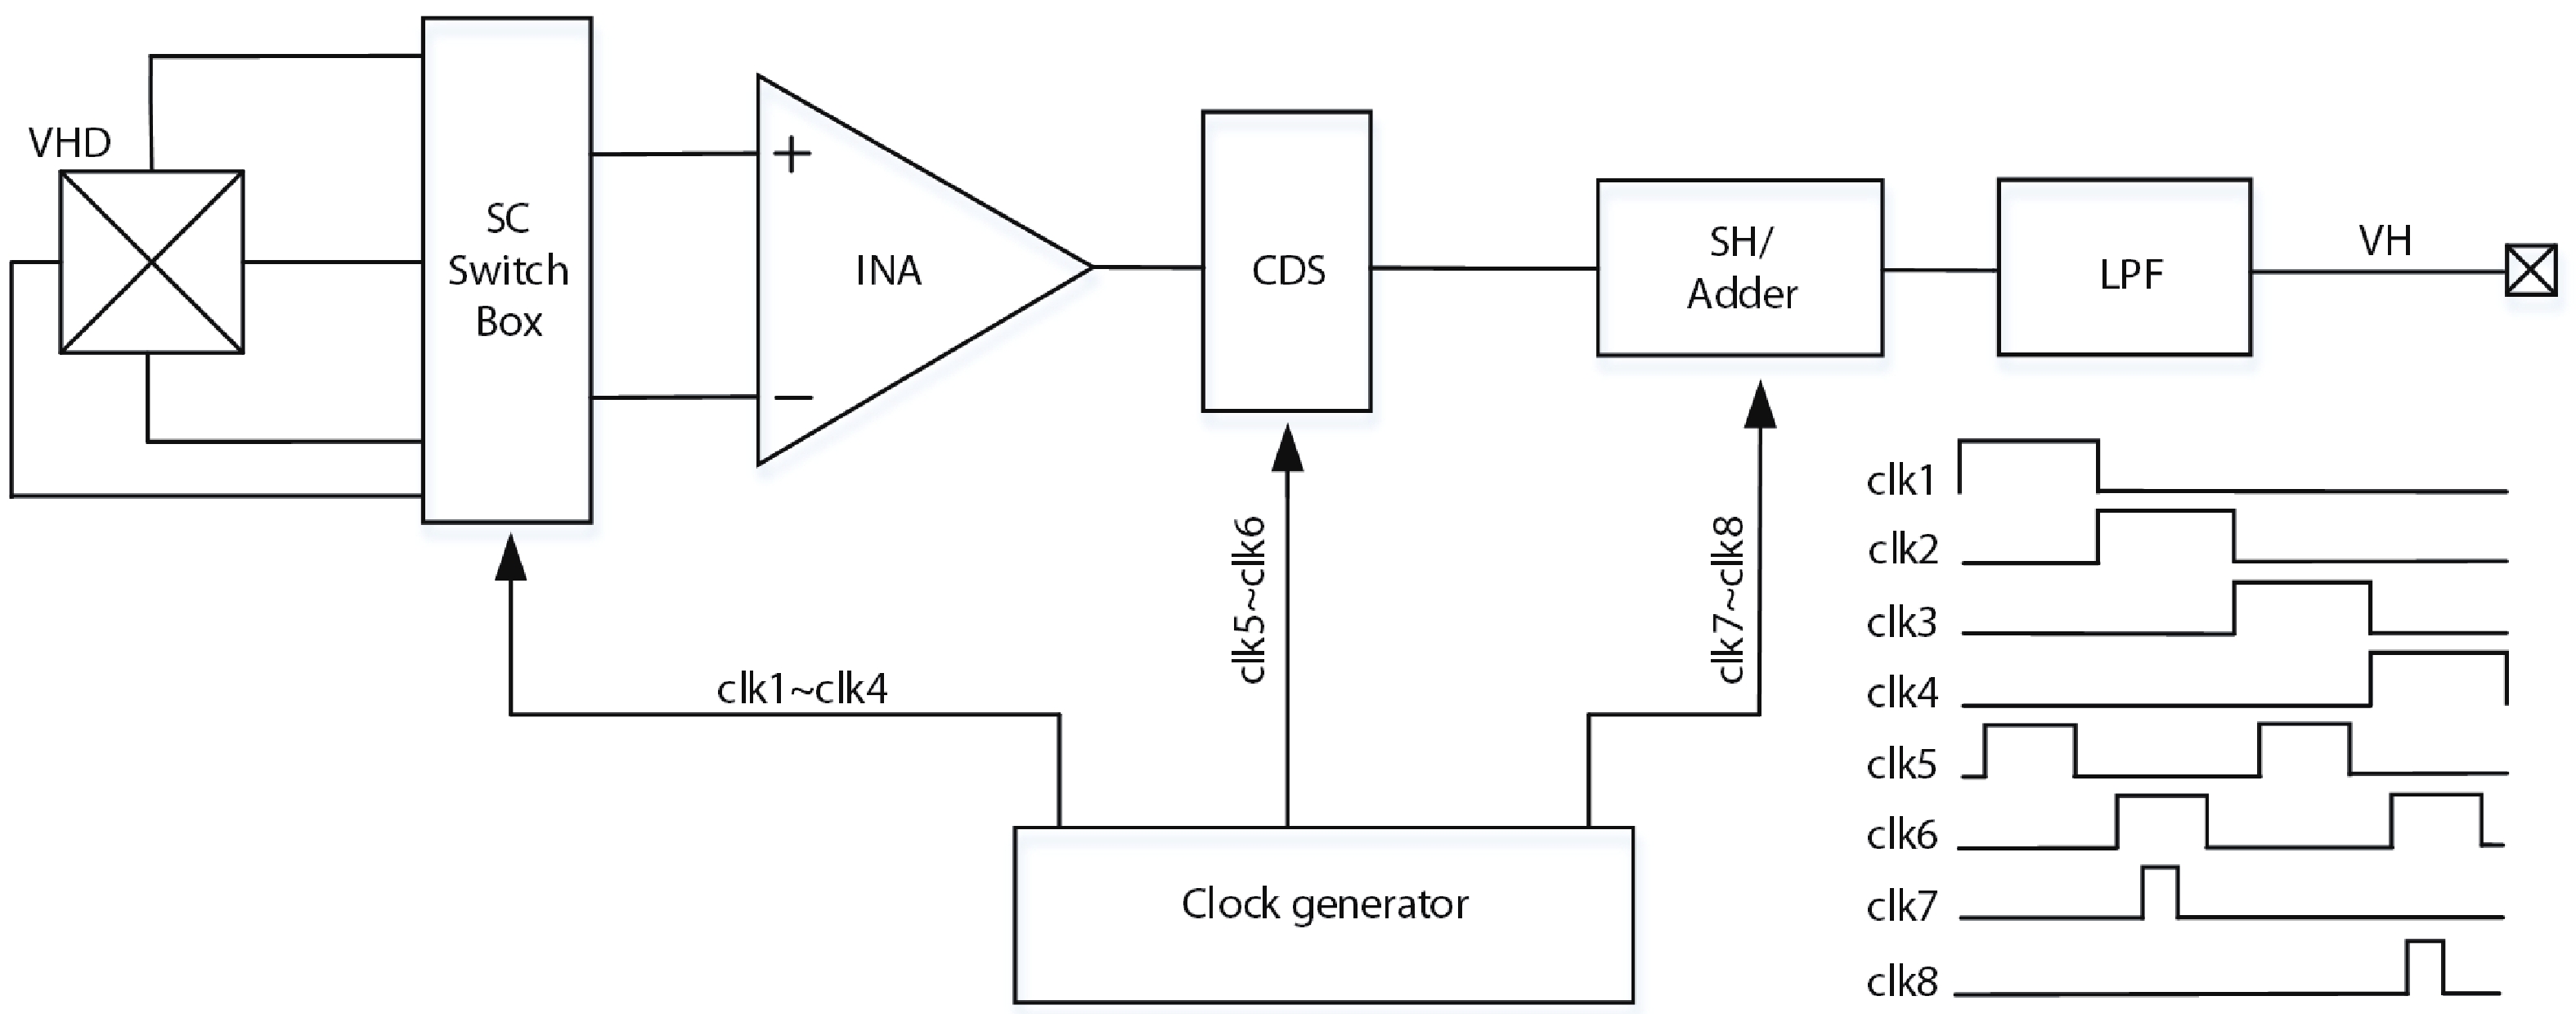 The block diagram of the proposed vertical Hall sensor.